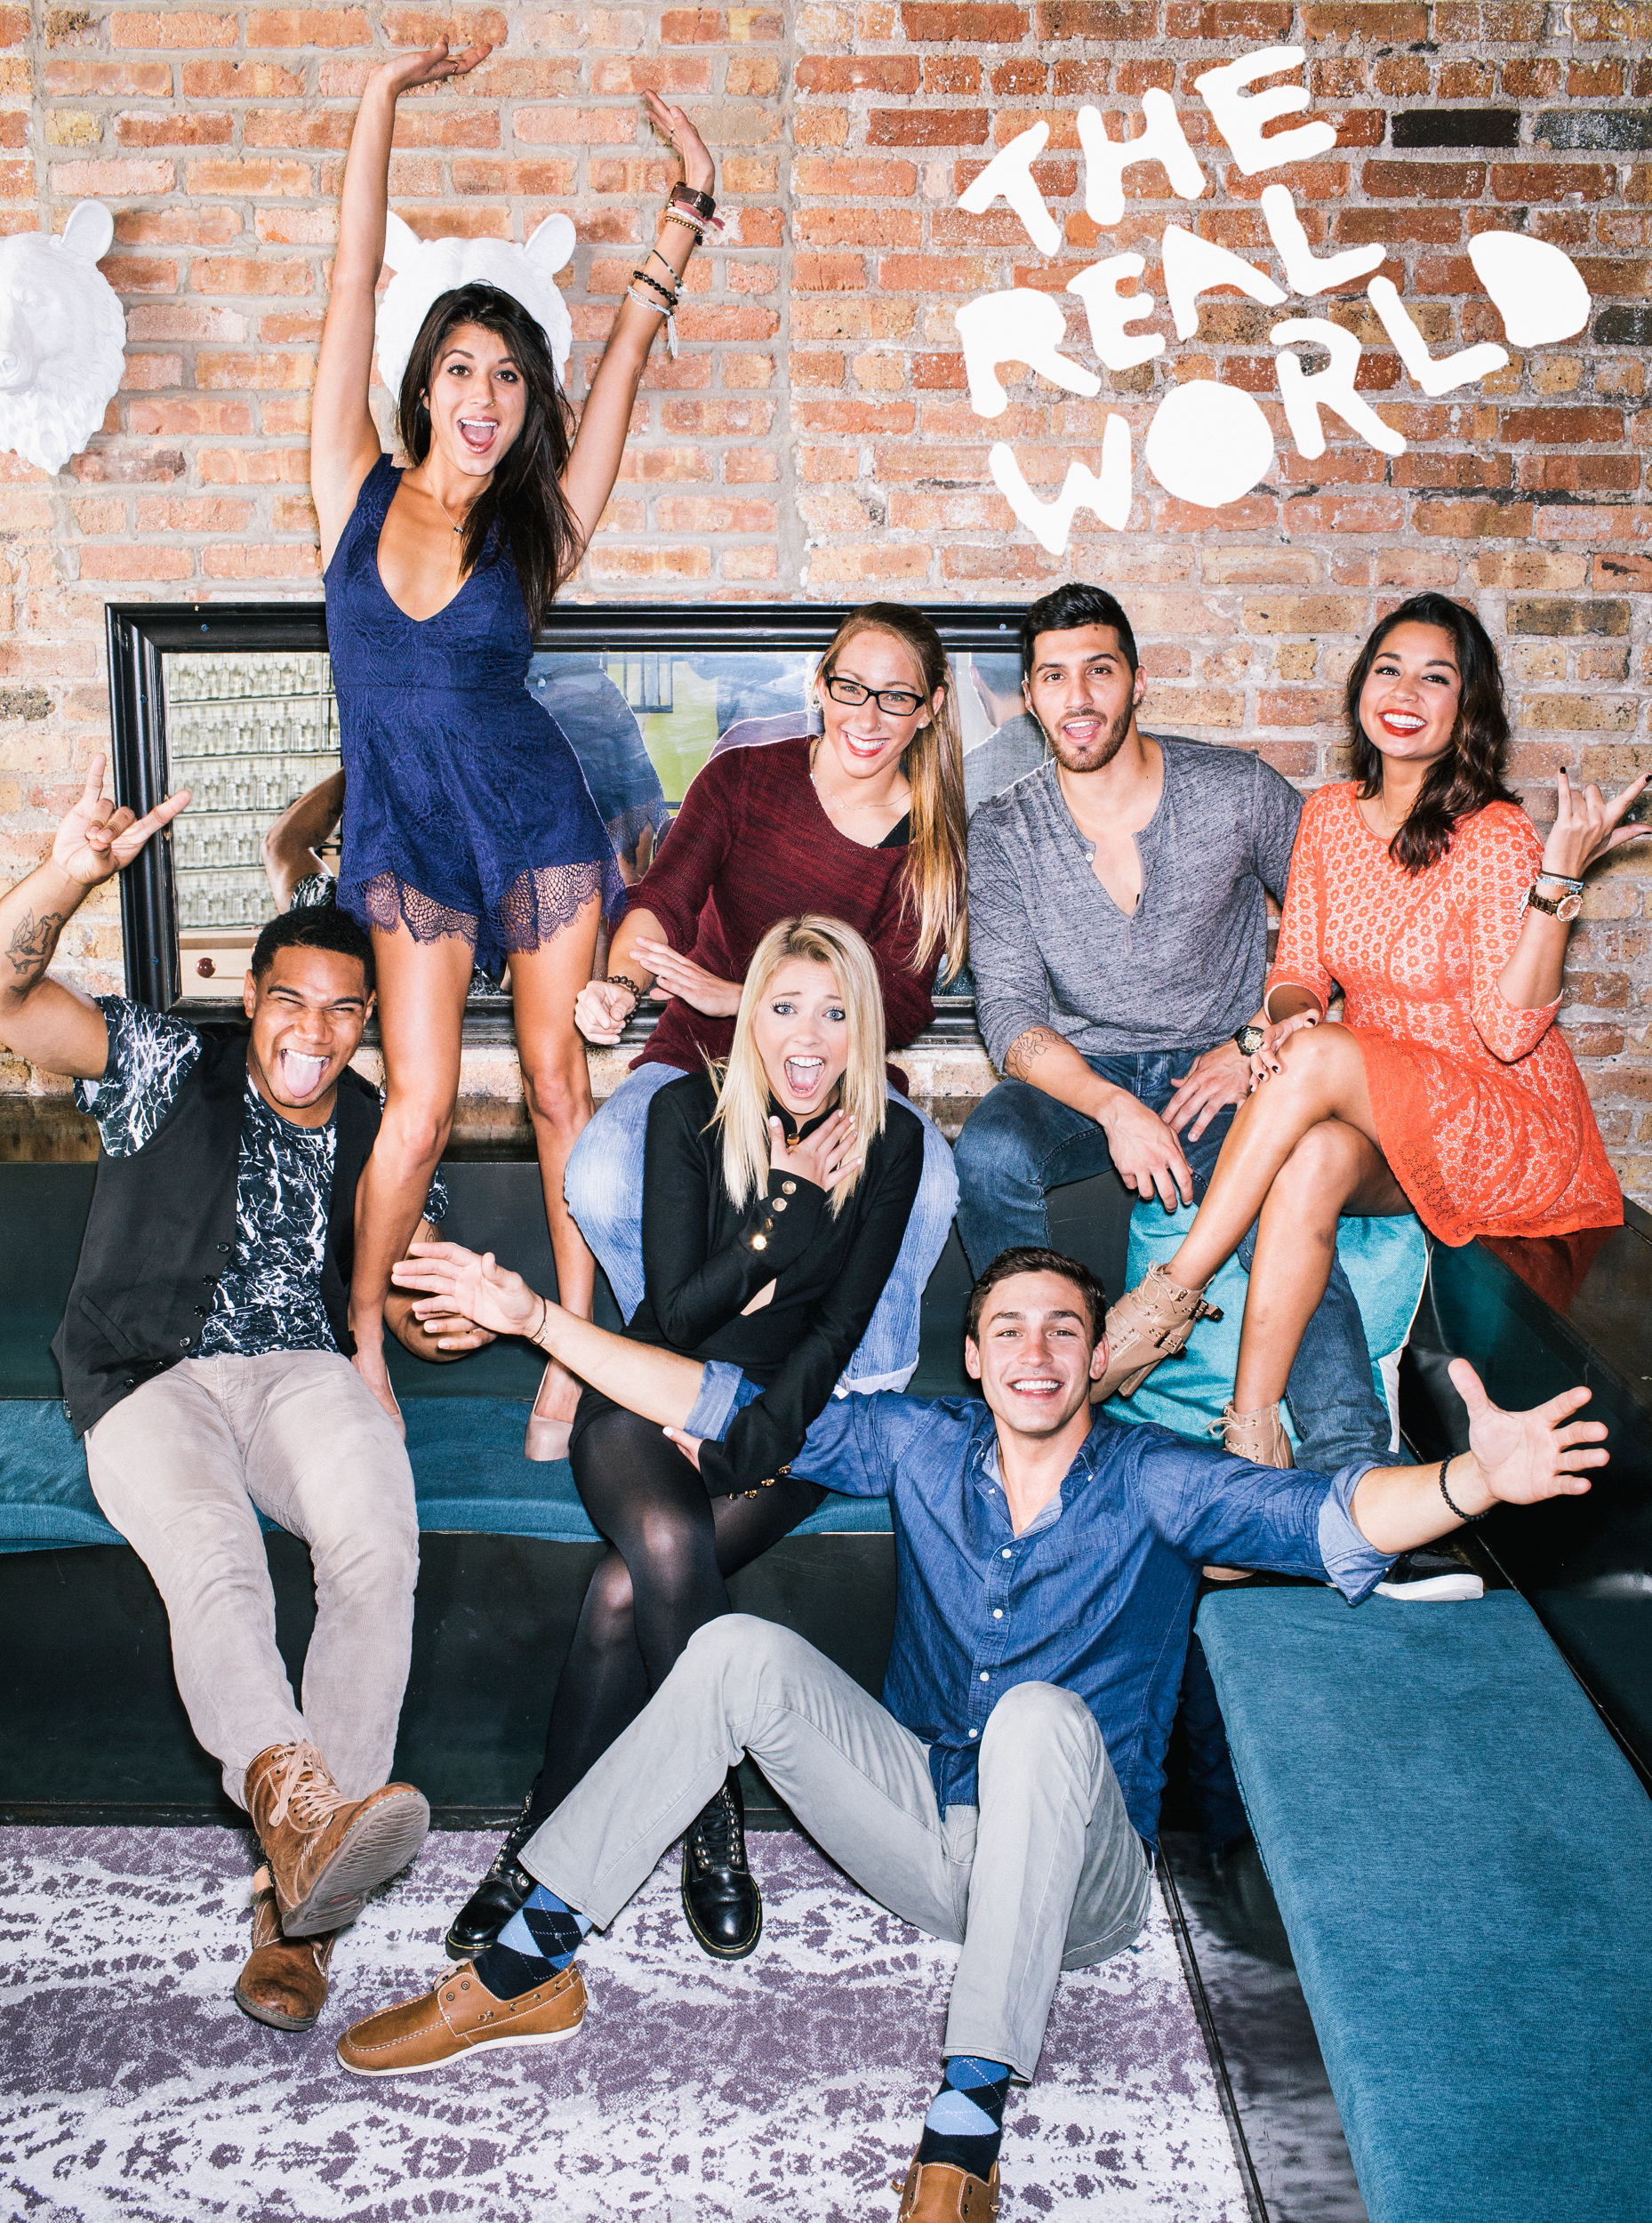 The Real World 2014/MTV